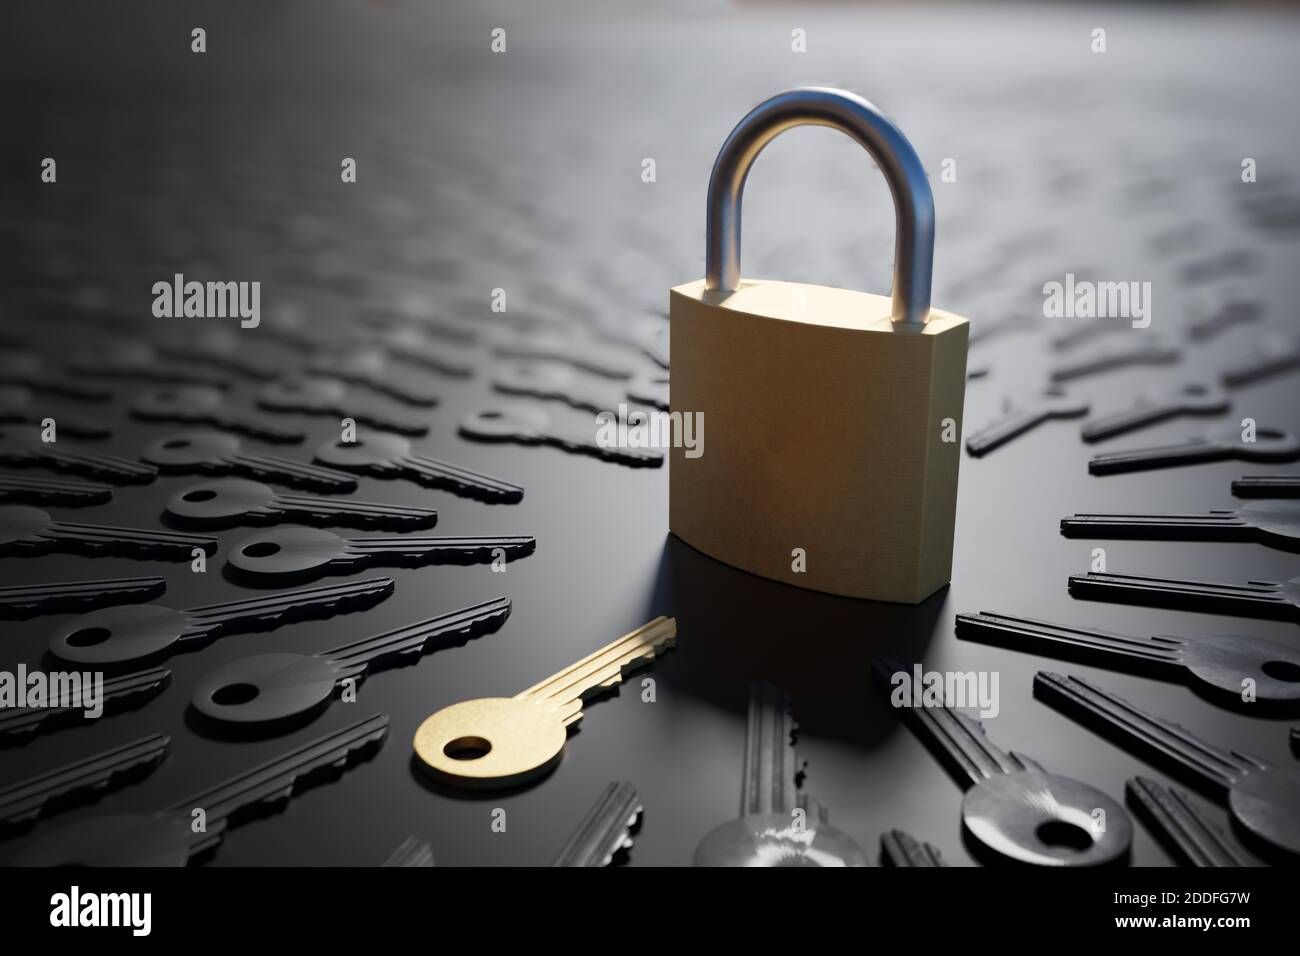 Encryption, safety and security concept. One golden key and many others next to padlock. 3D rendered illustration. Stock Photo